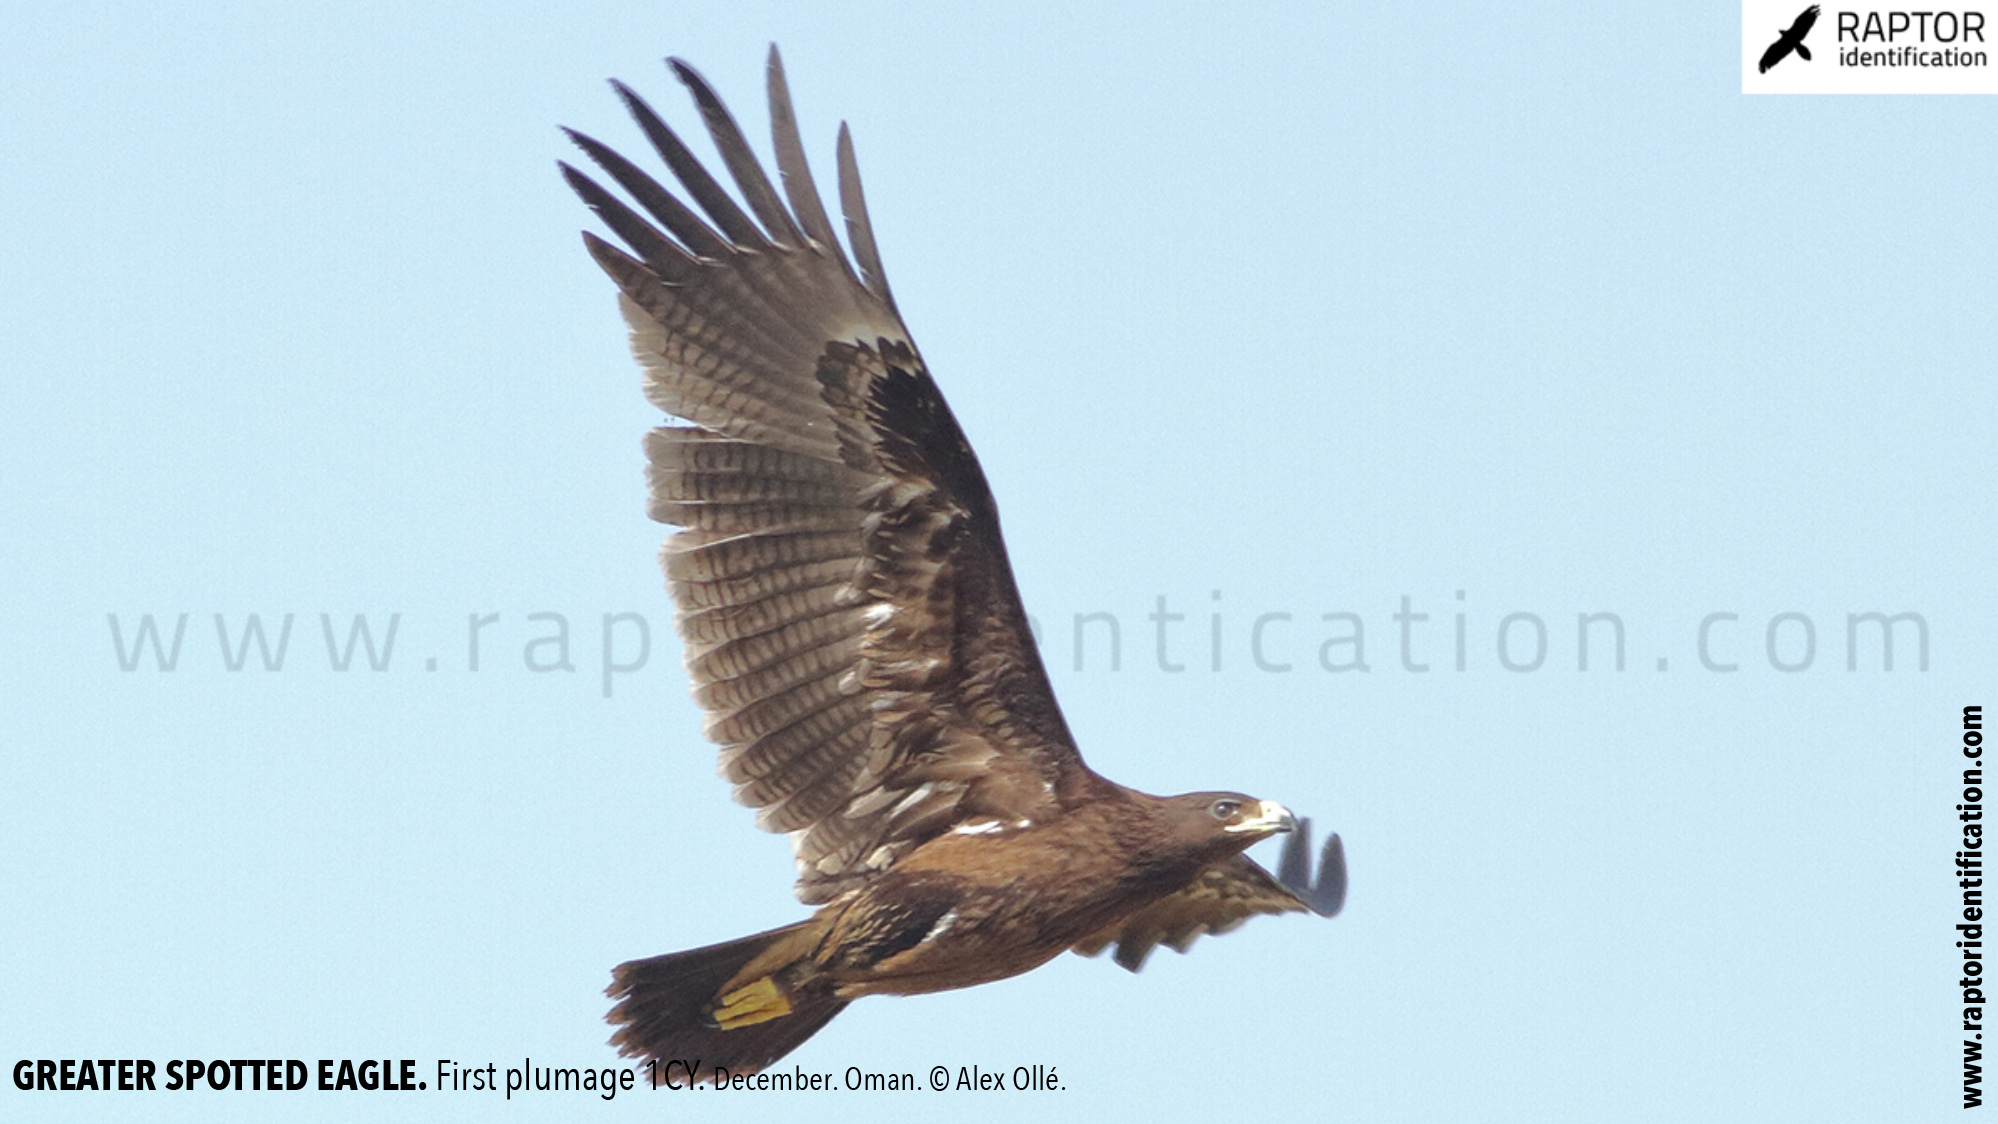 Greater-spotted-eagle-identification-juvenile-clanga-clanga